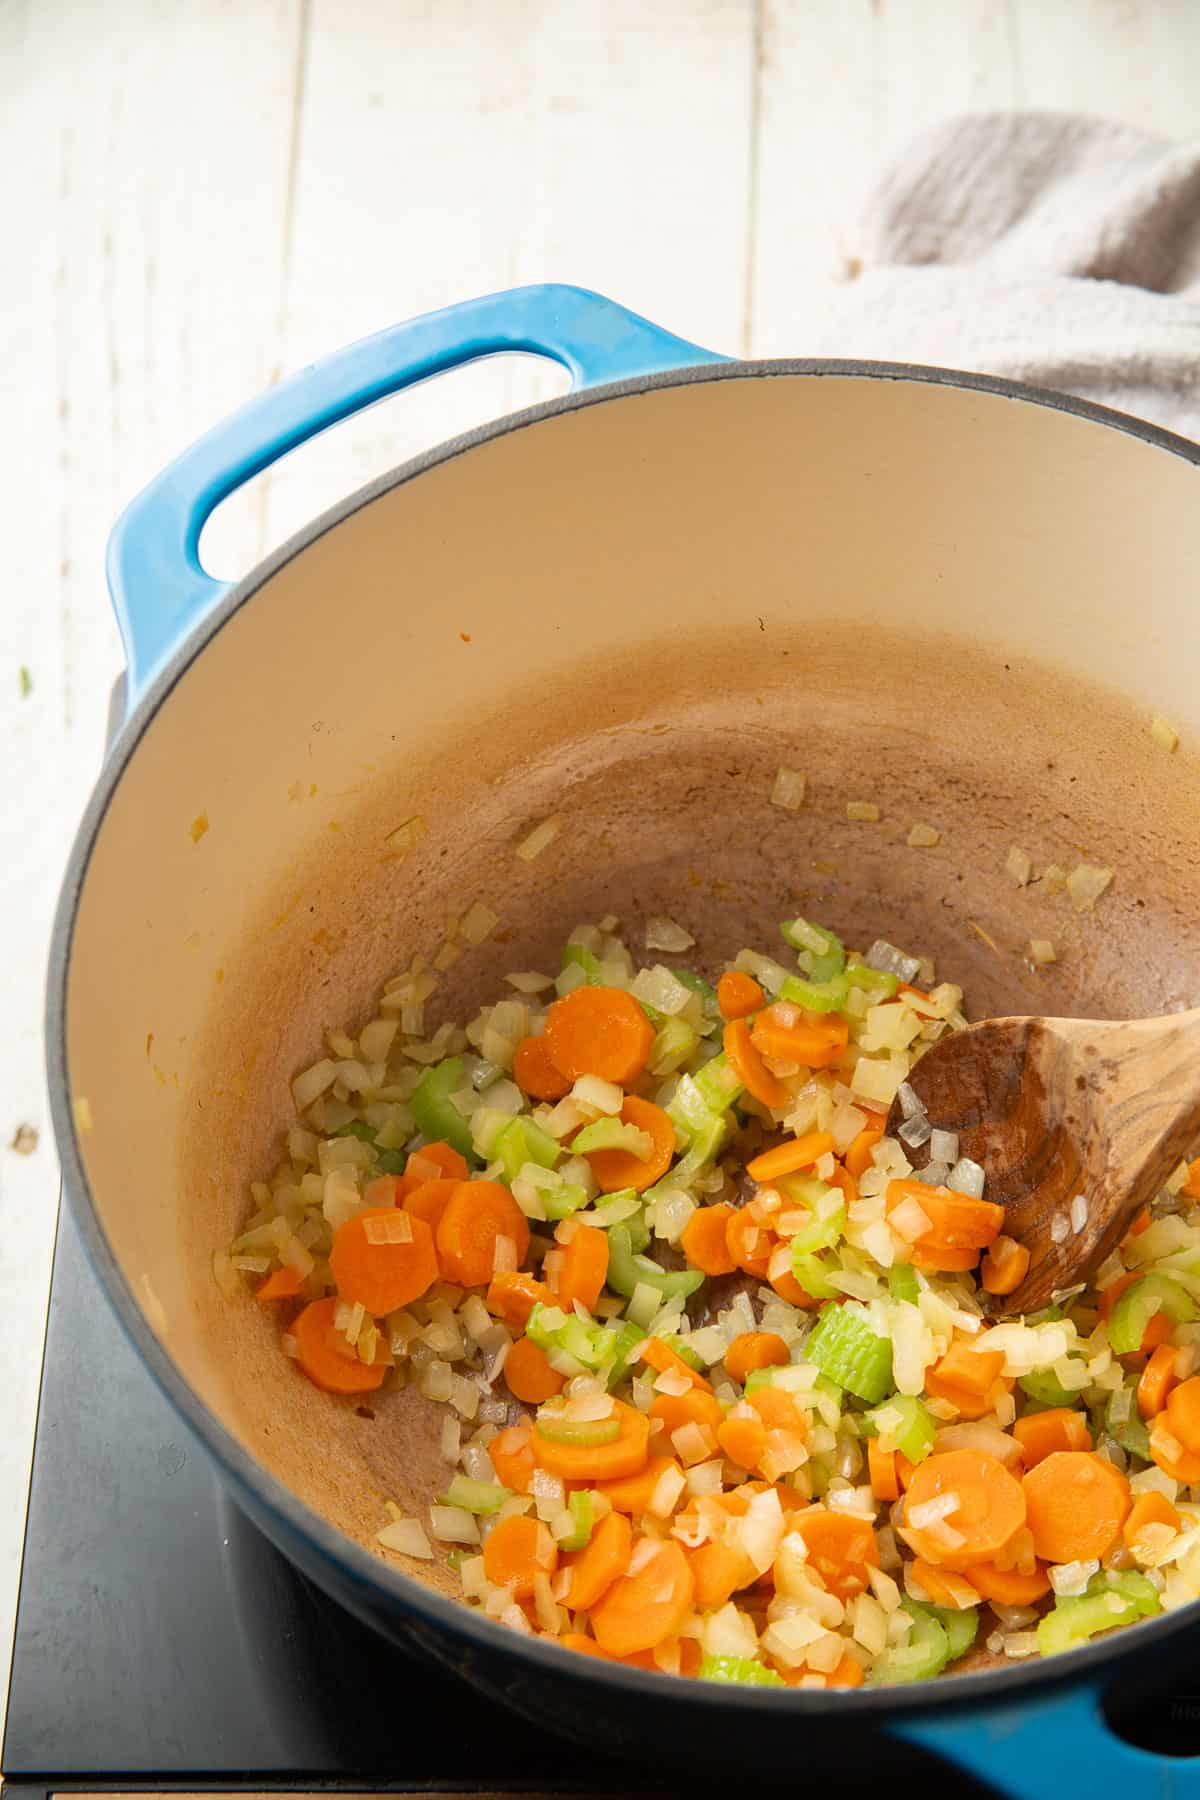 Onion, celery, and carrots cooking in a pot.